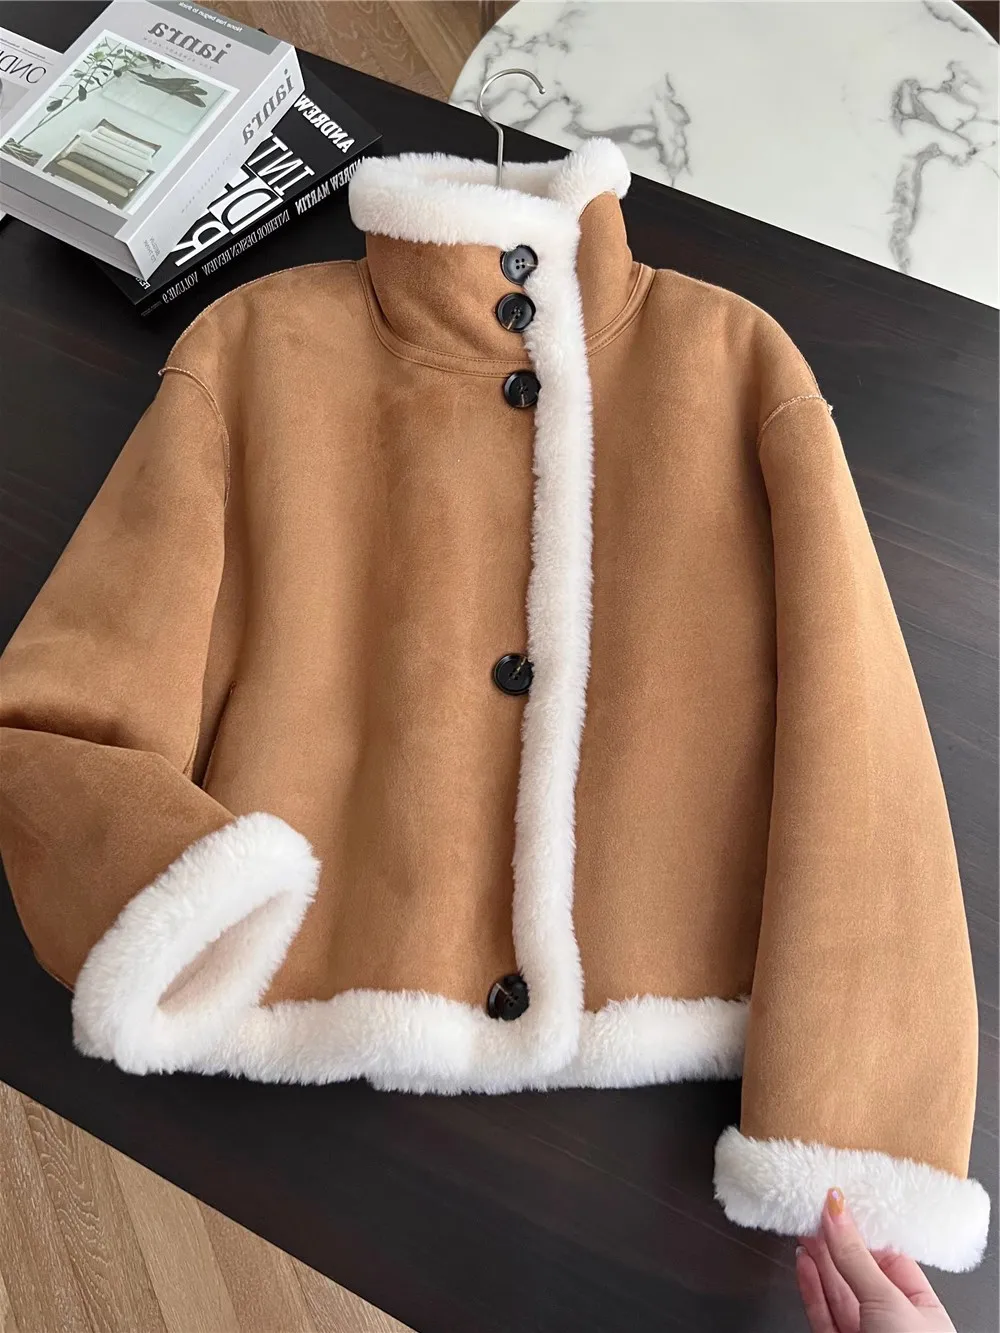 

Reversible Garment Suede Integrated Plush Jacket Fur Coats Especially Lined Woman Winter Free Shipping New In External Clothes